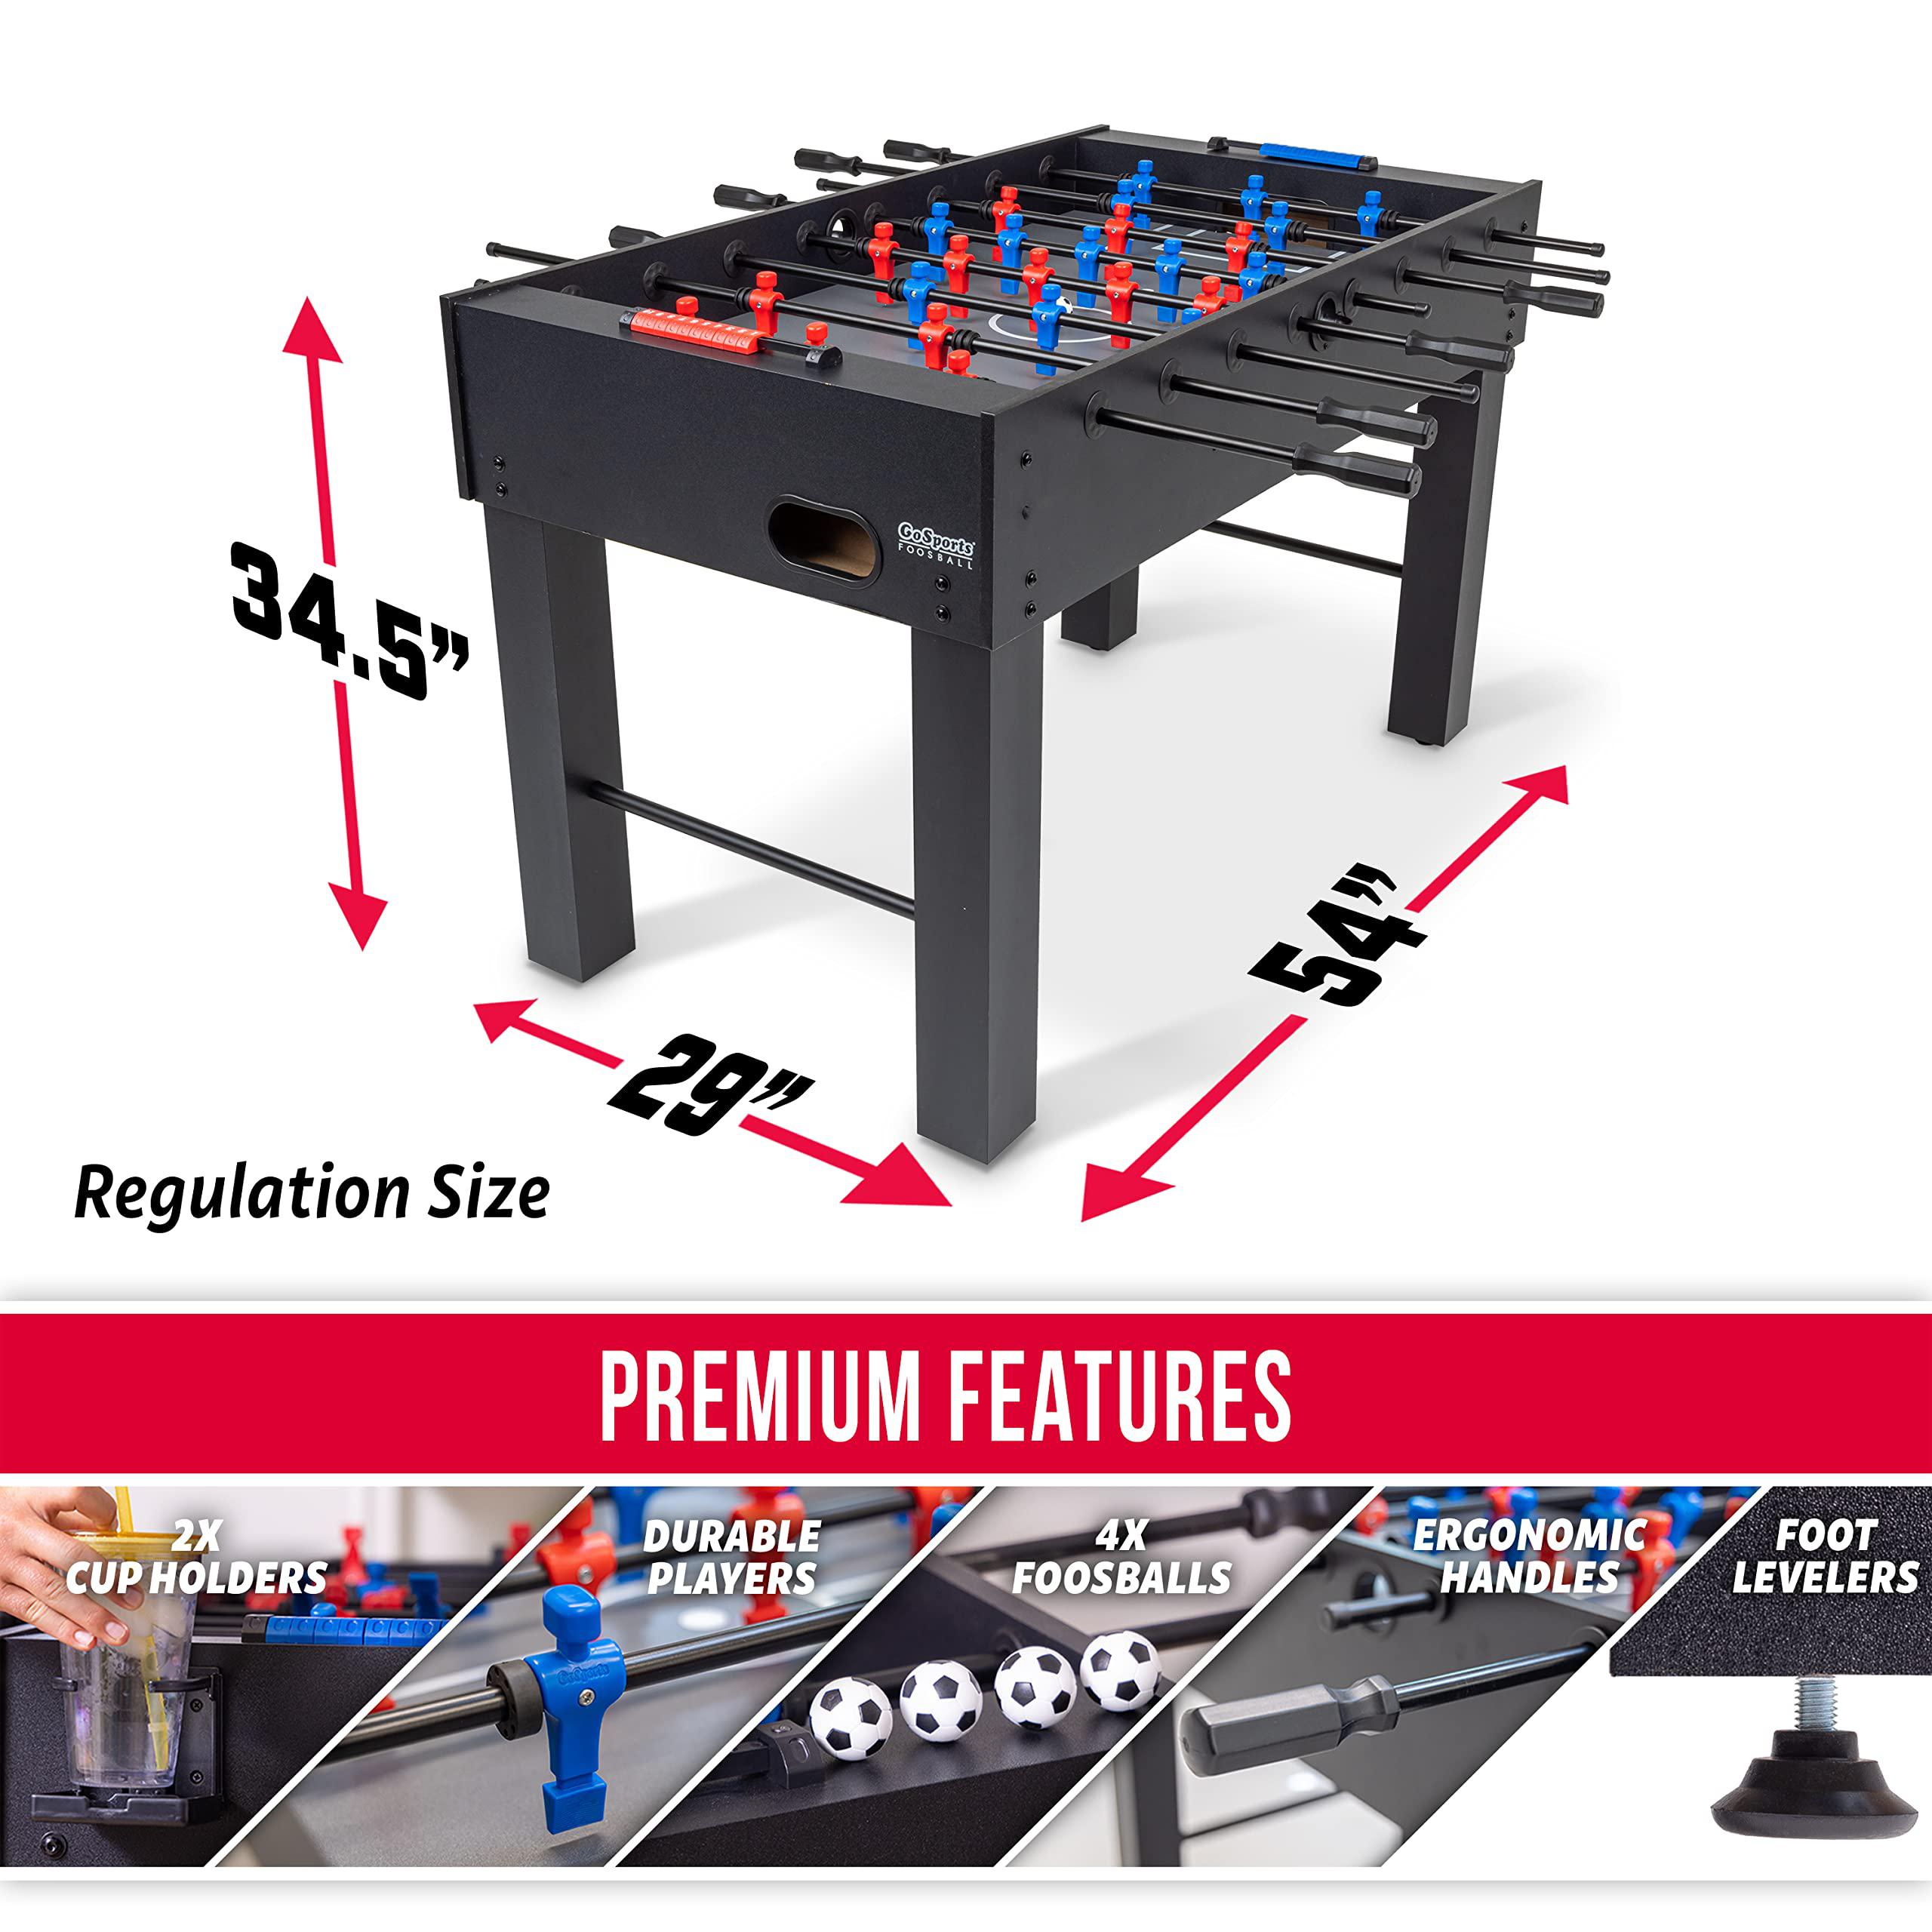 gosports 54 inch full size foosball table - black finish - includes 4 balls and 2 cup holders